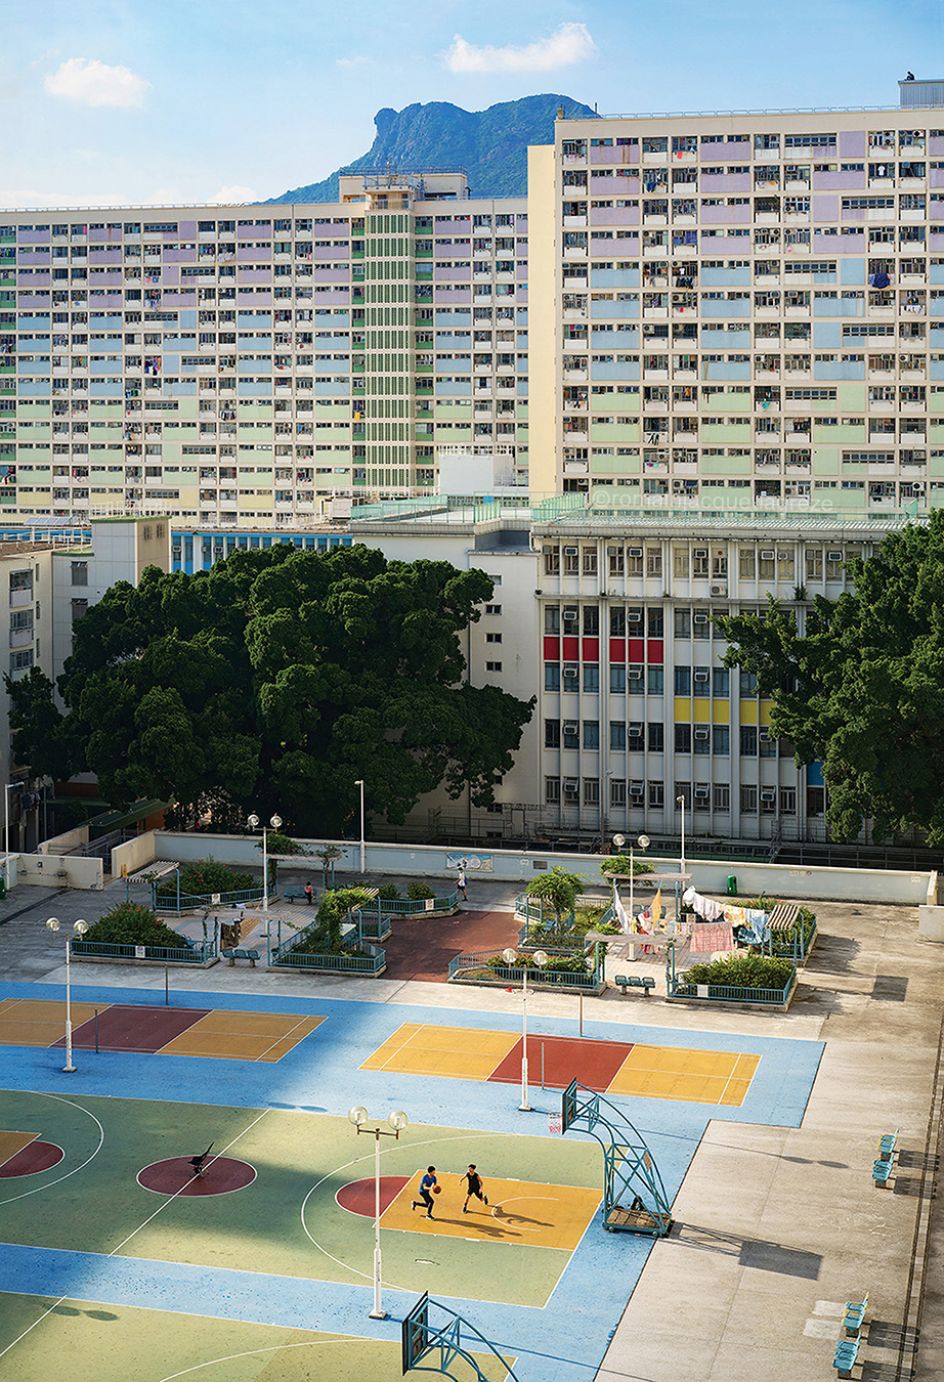 © Romain Jacquet-Lagréze, Youth Vibrancy, Hong Kong 2020, Courtesy of Blue Lotus Gallery